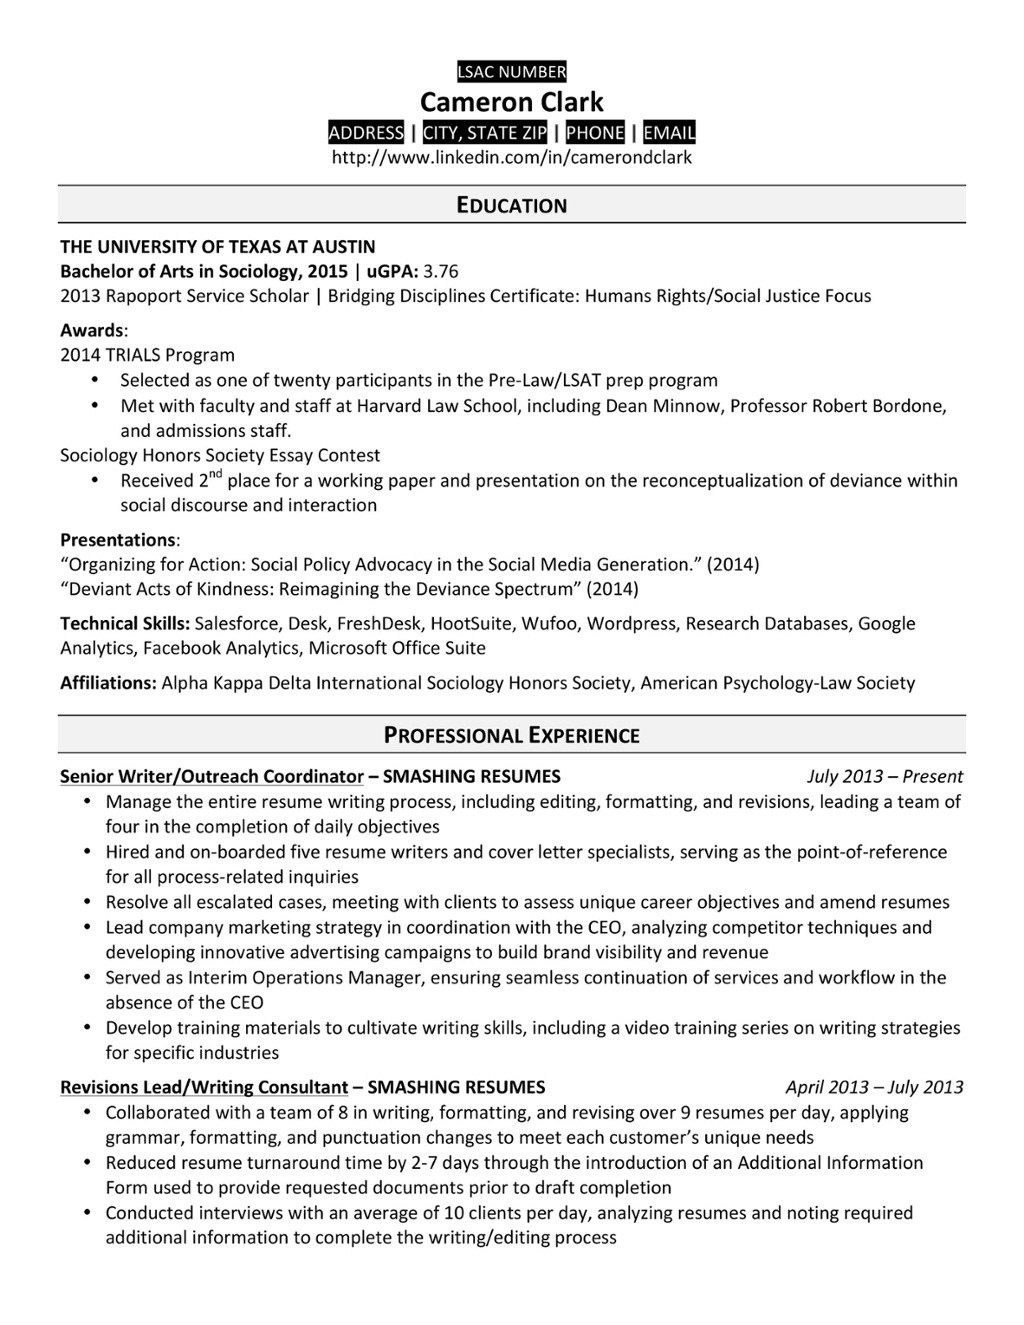 Sample Resumes for Law School Applications 5 Law School Resume Templates: Prepping Your Resume for Law School …